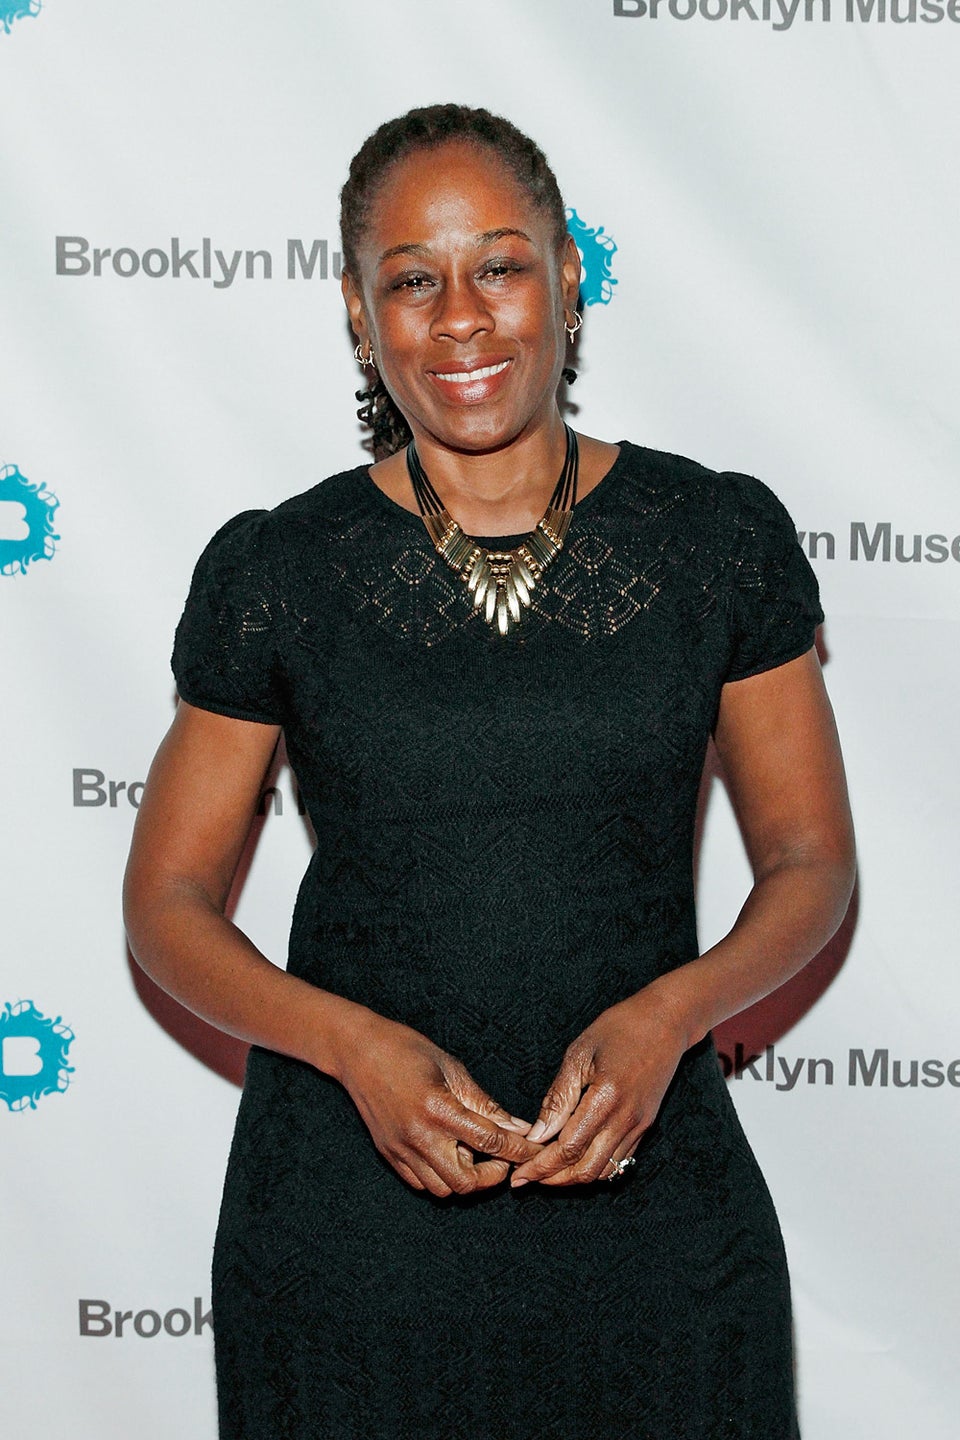 Where Do We Go From Here?: Essay by Chirlane McCray